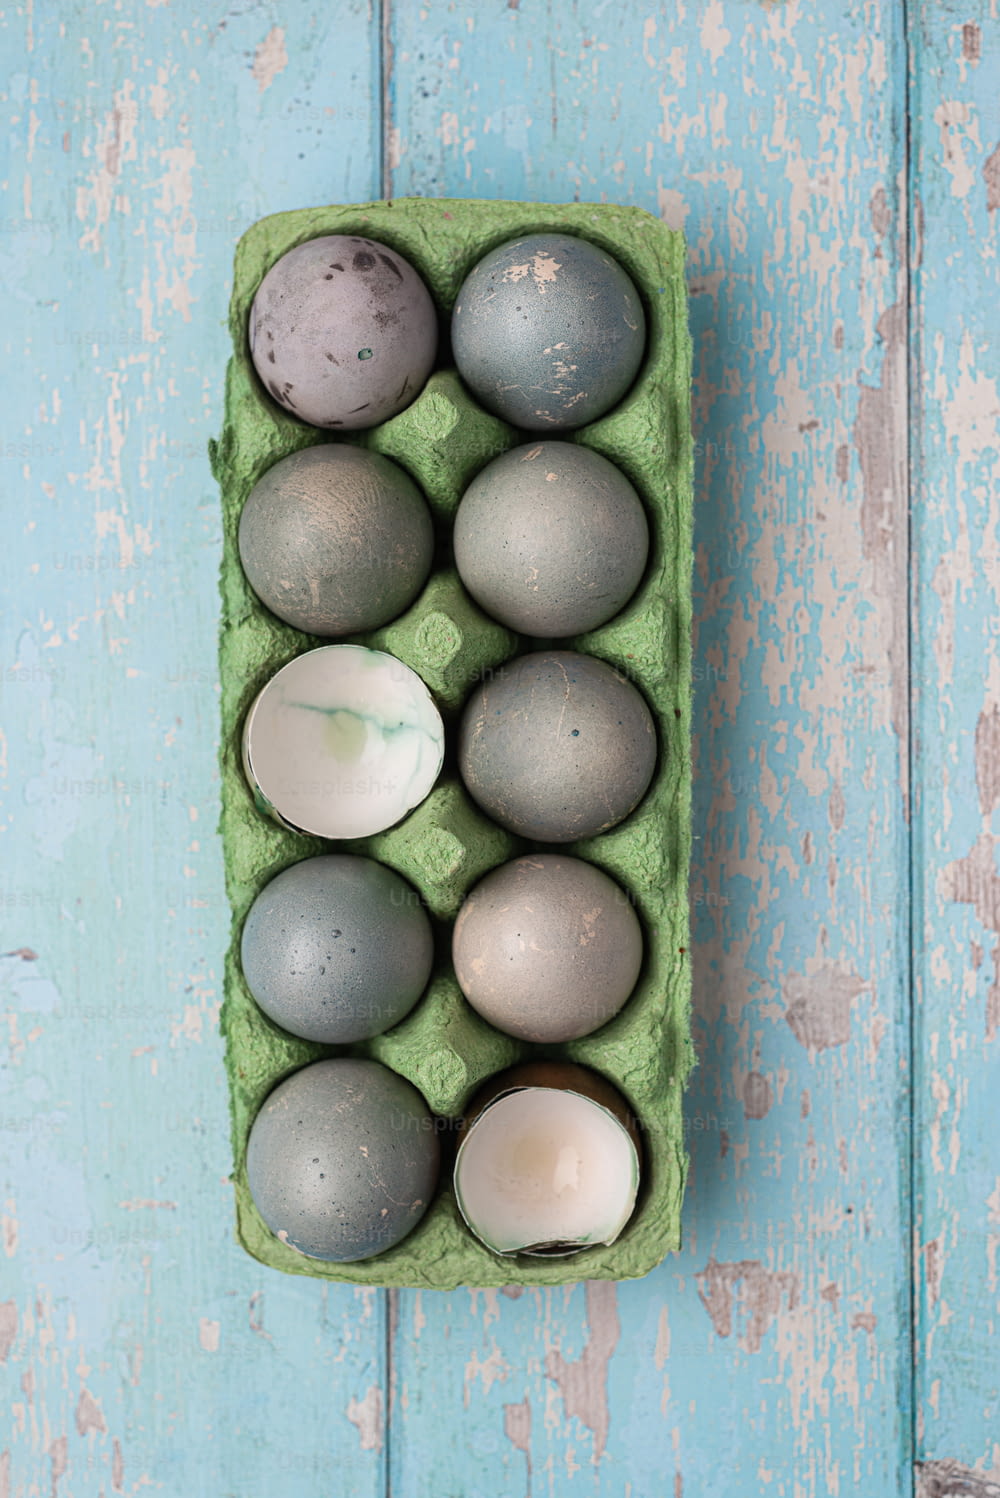 a green carton filled with gray and white eggs